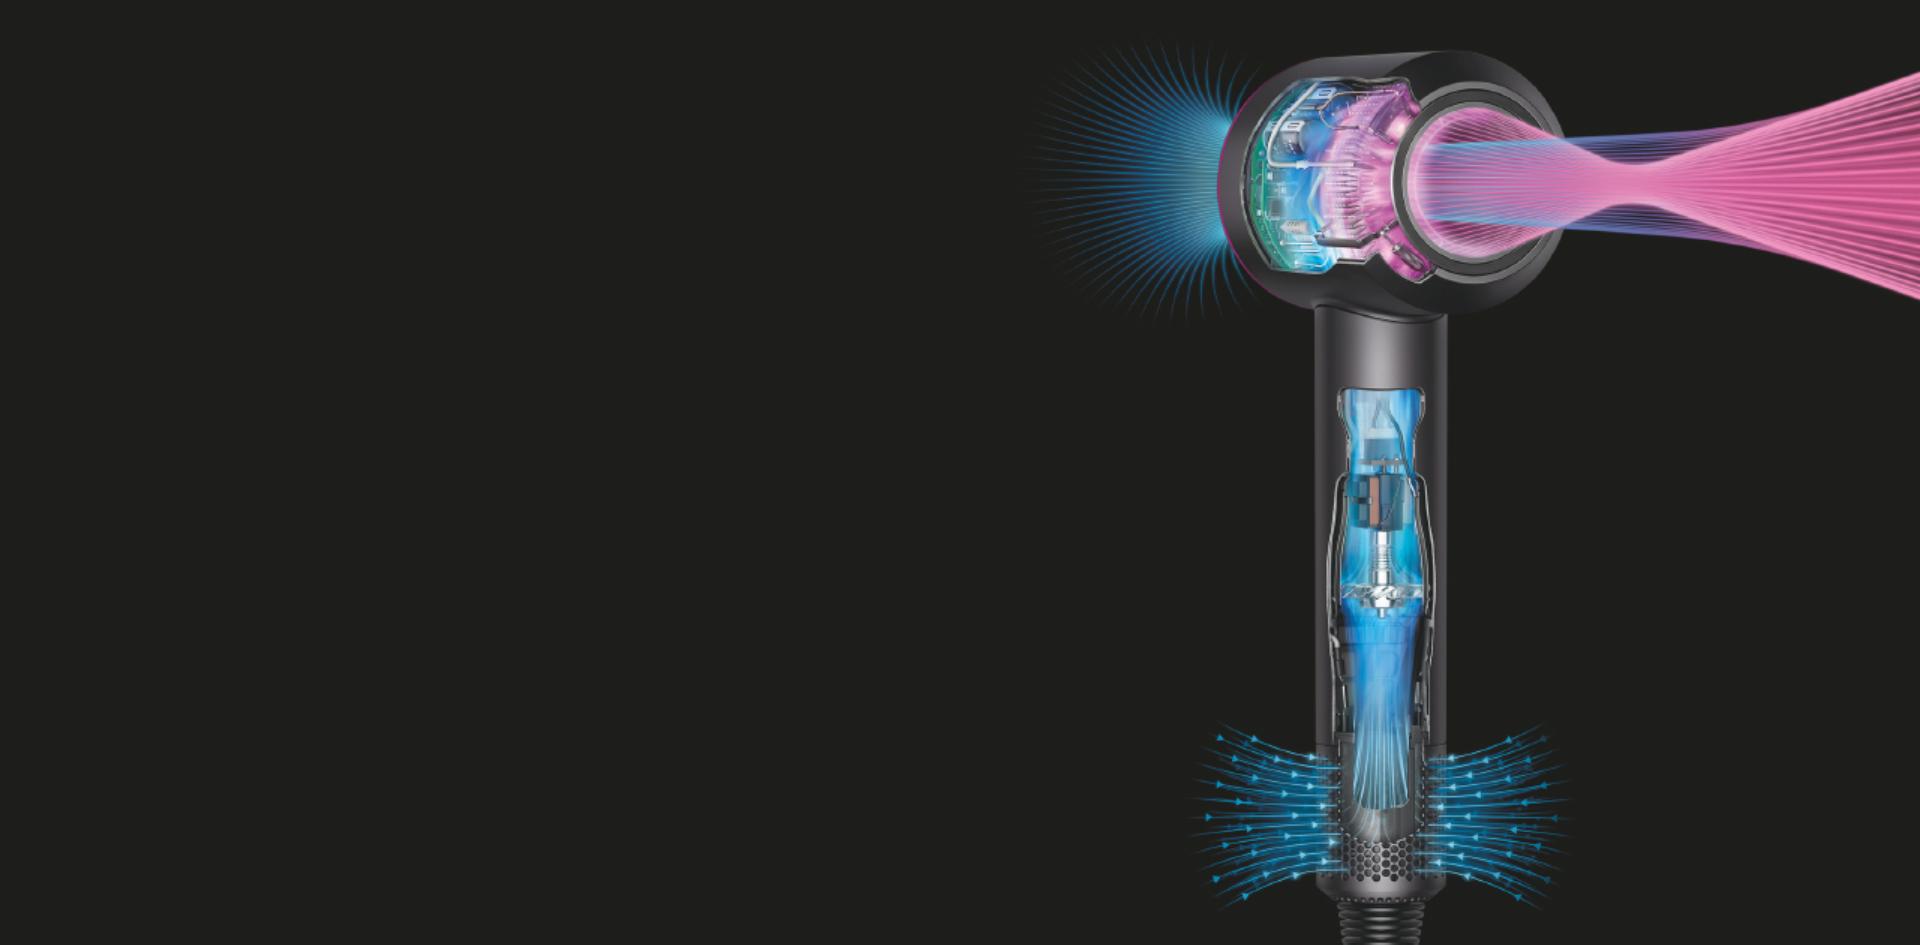 Airflow through the Dyson Supersonic Professional hair dryer